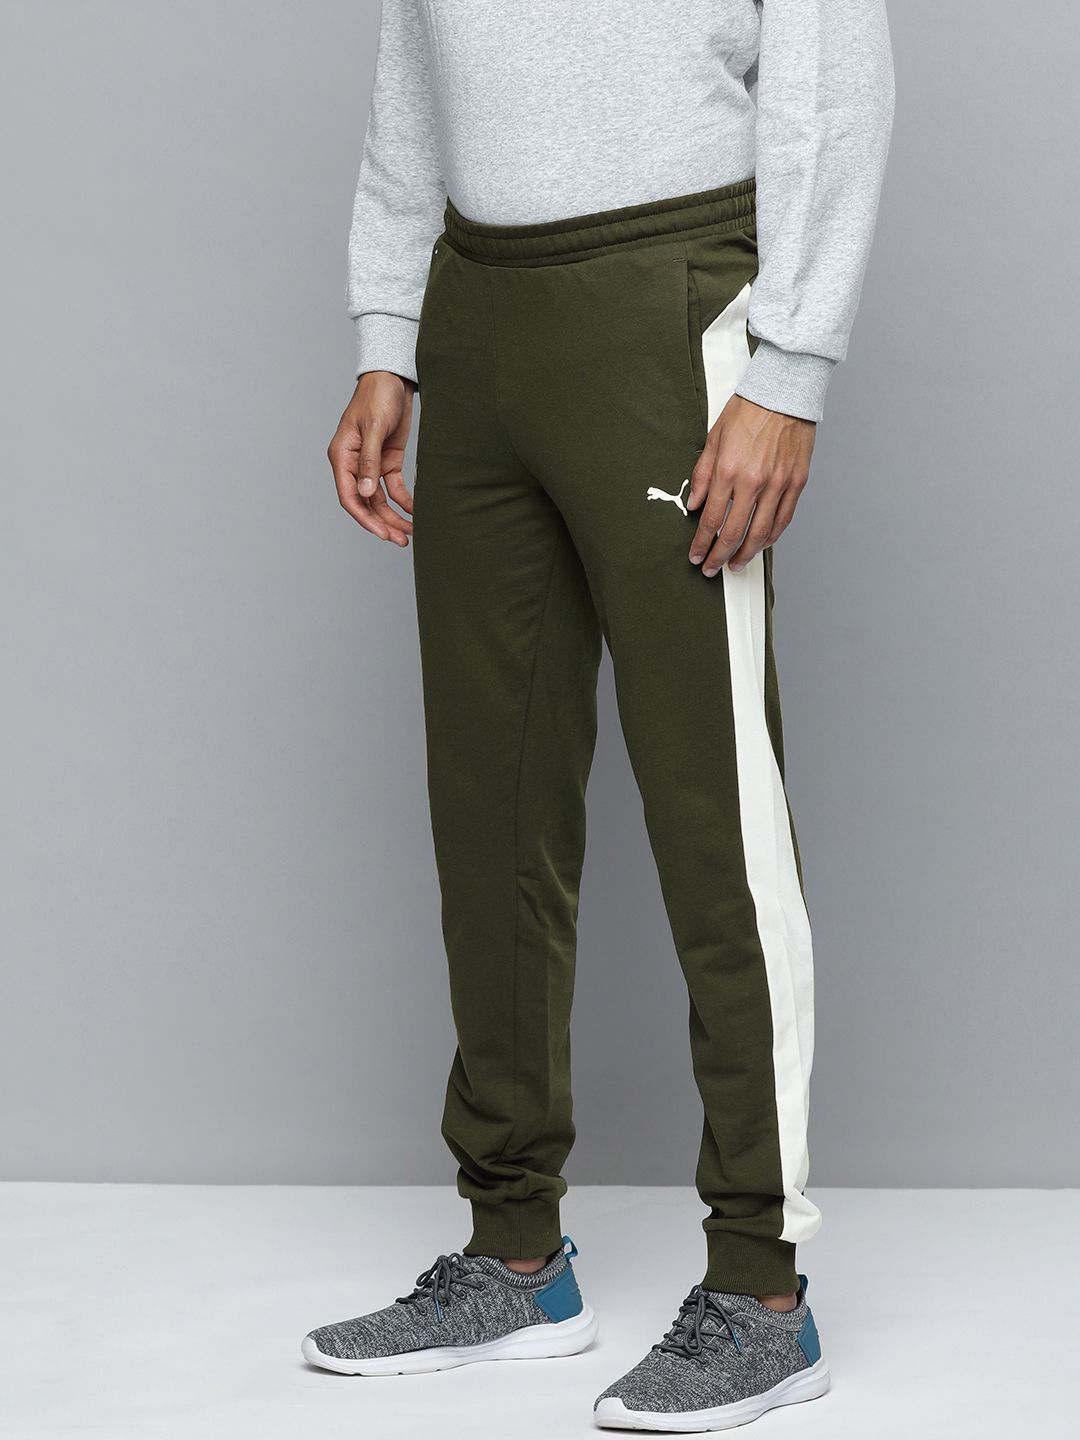 Buy PUMA Men's Grey one8 Track Pant Online at Low Prices in India -  Paytmmall.com